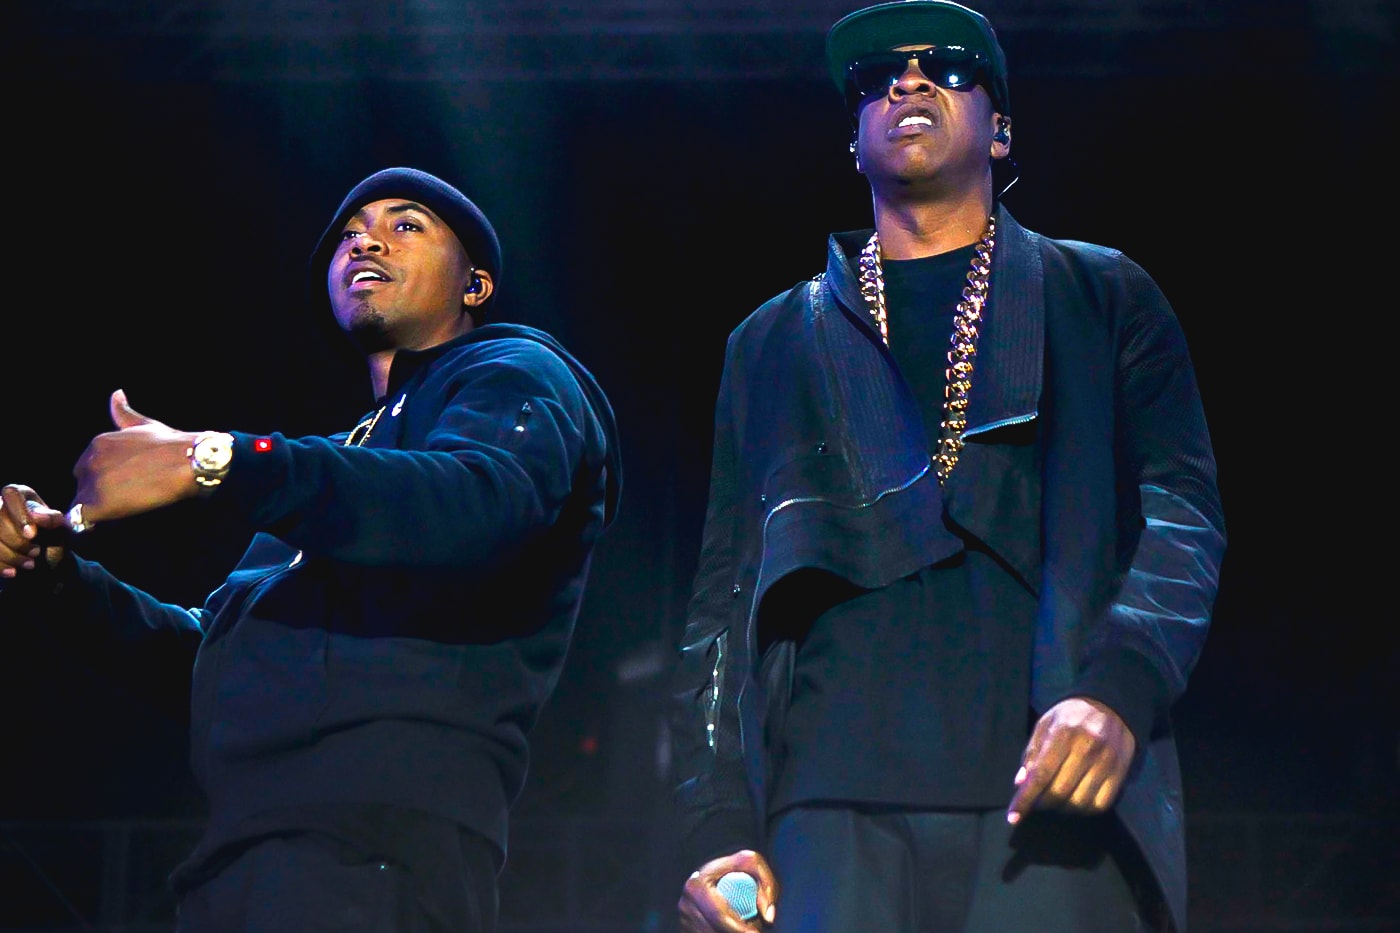 JAY-Z Curates TIDAL Playlist for Nas curated by the hov god dj khaled collab